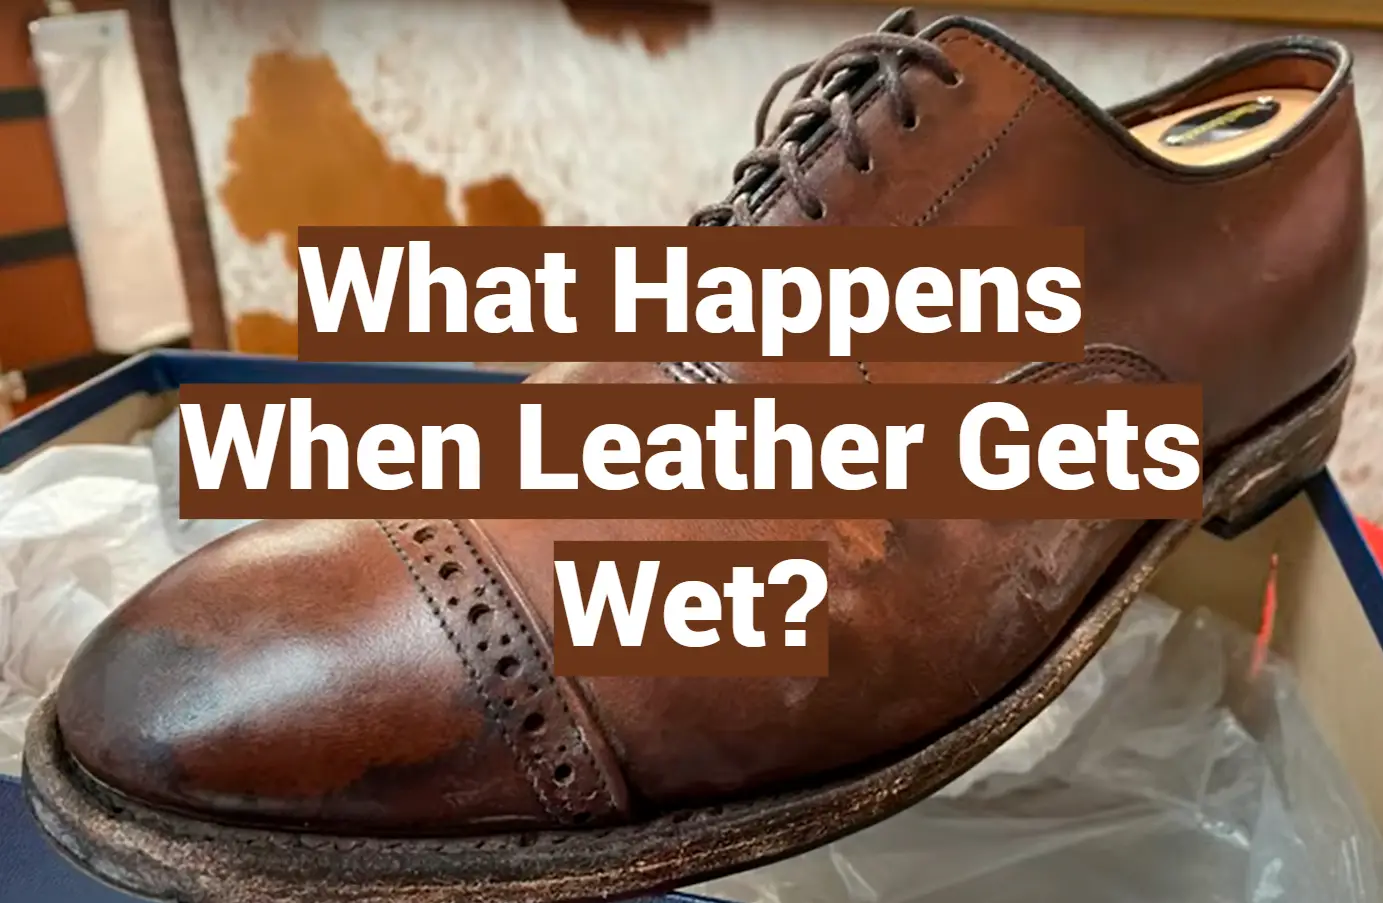 What Happens When Leather Gets Wet?